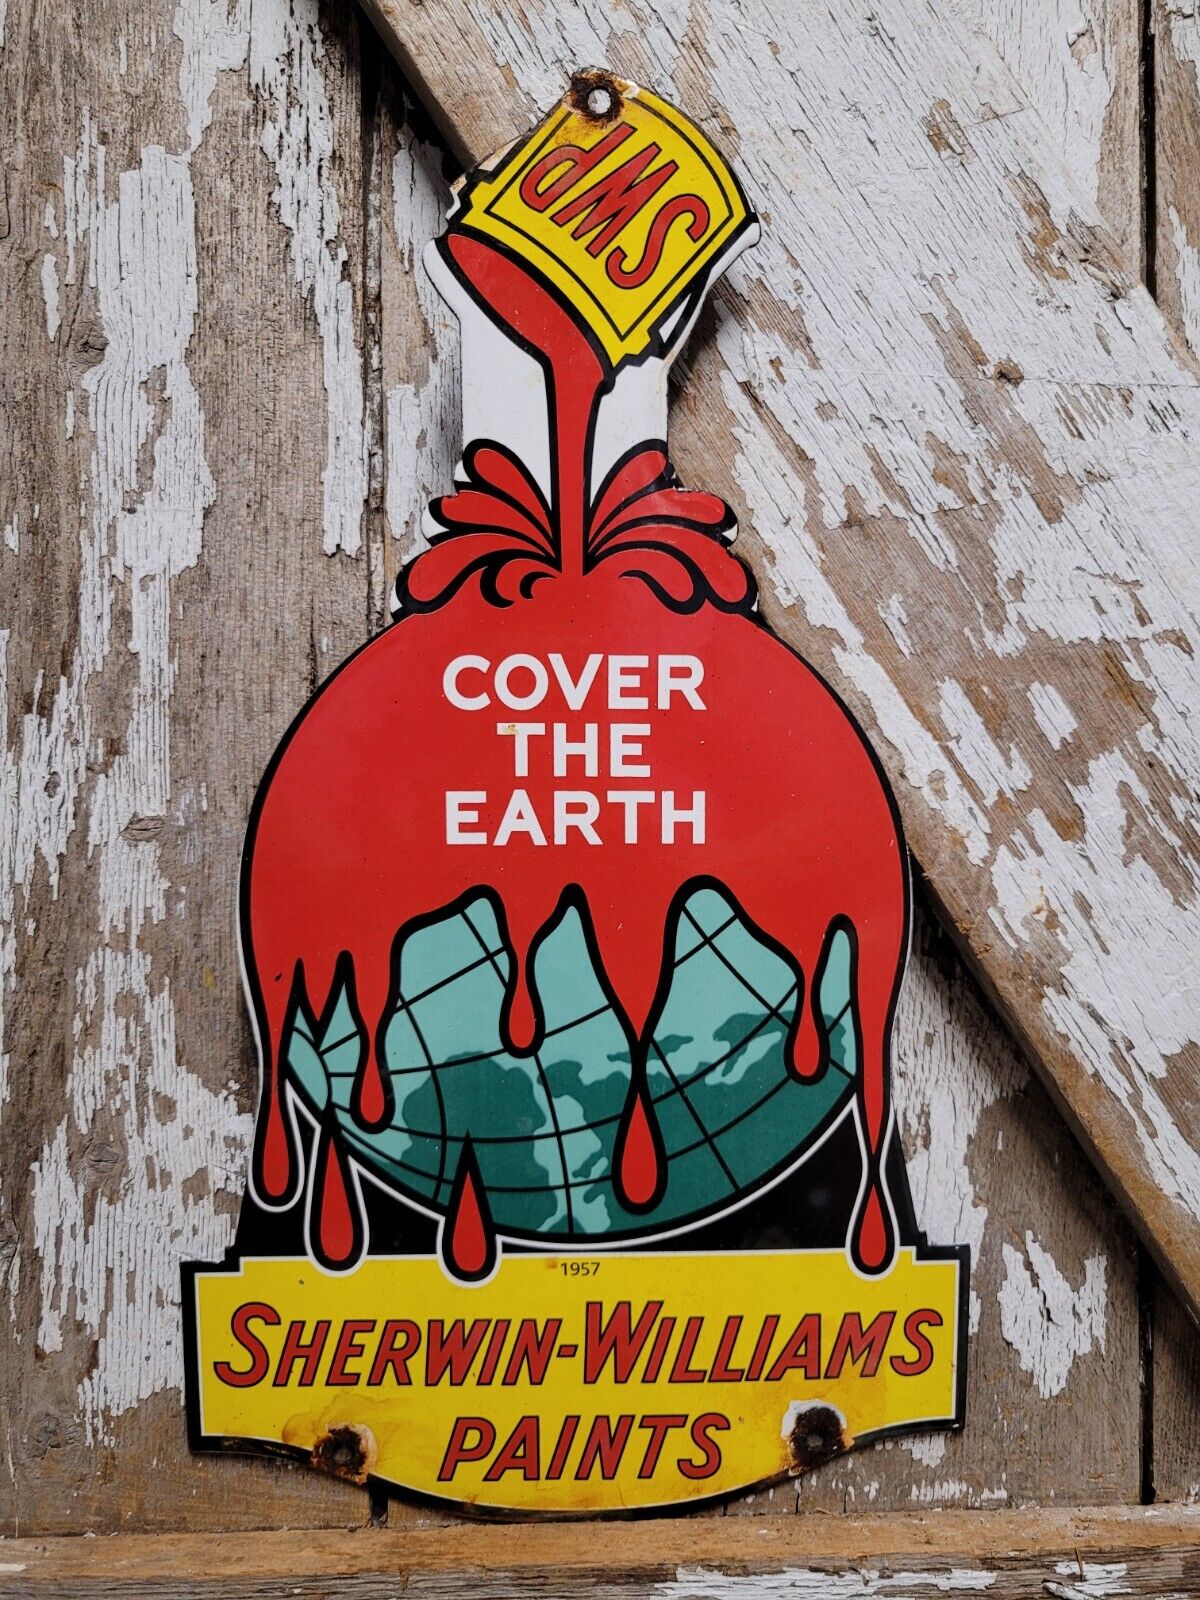 SHERWIN WILLIAMS VINTAGE PORCELAIN SIGN OLD HARDWARE PAINT CAN COVER THE EARTH